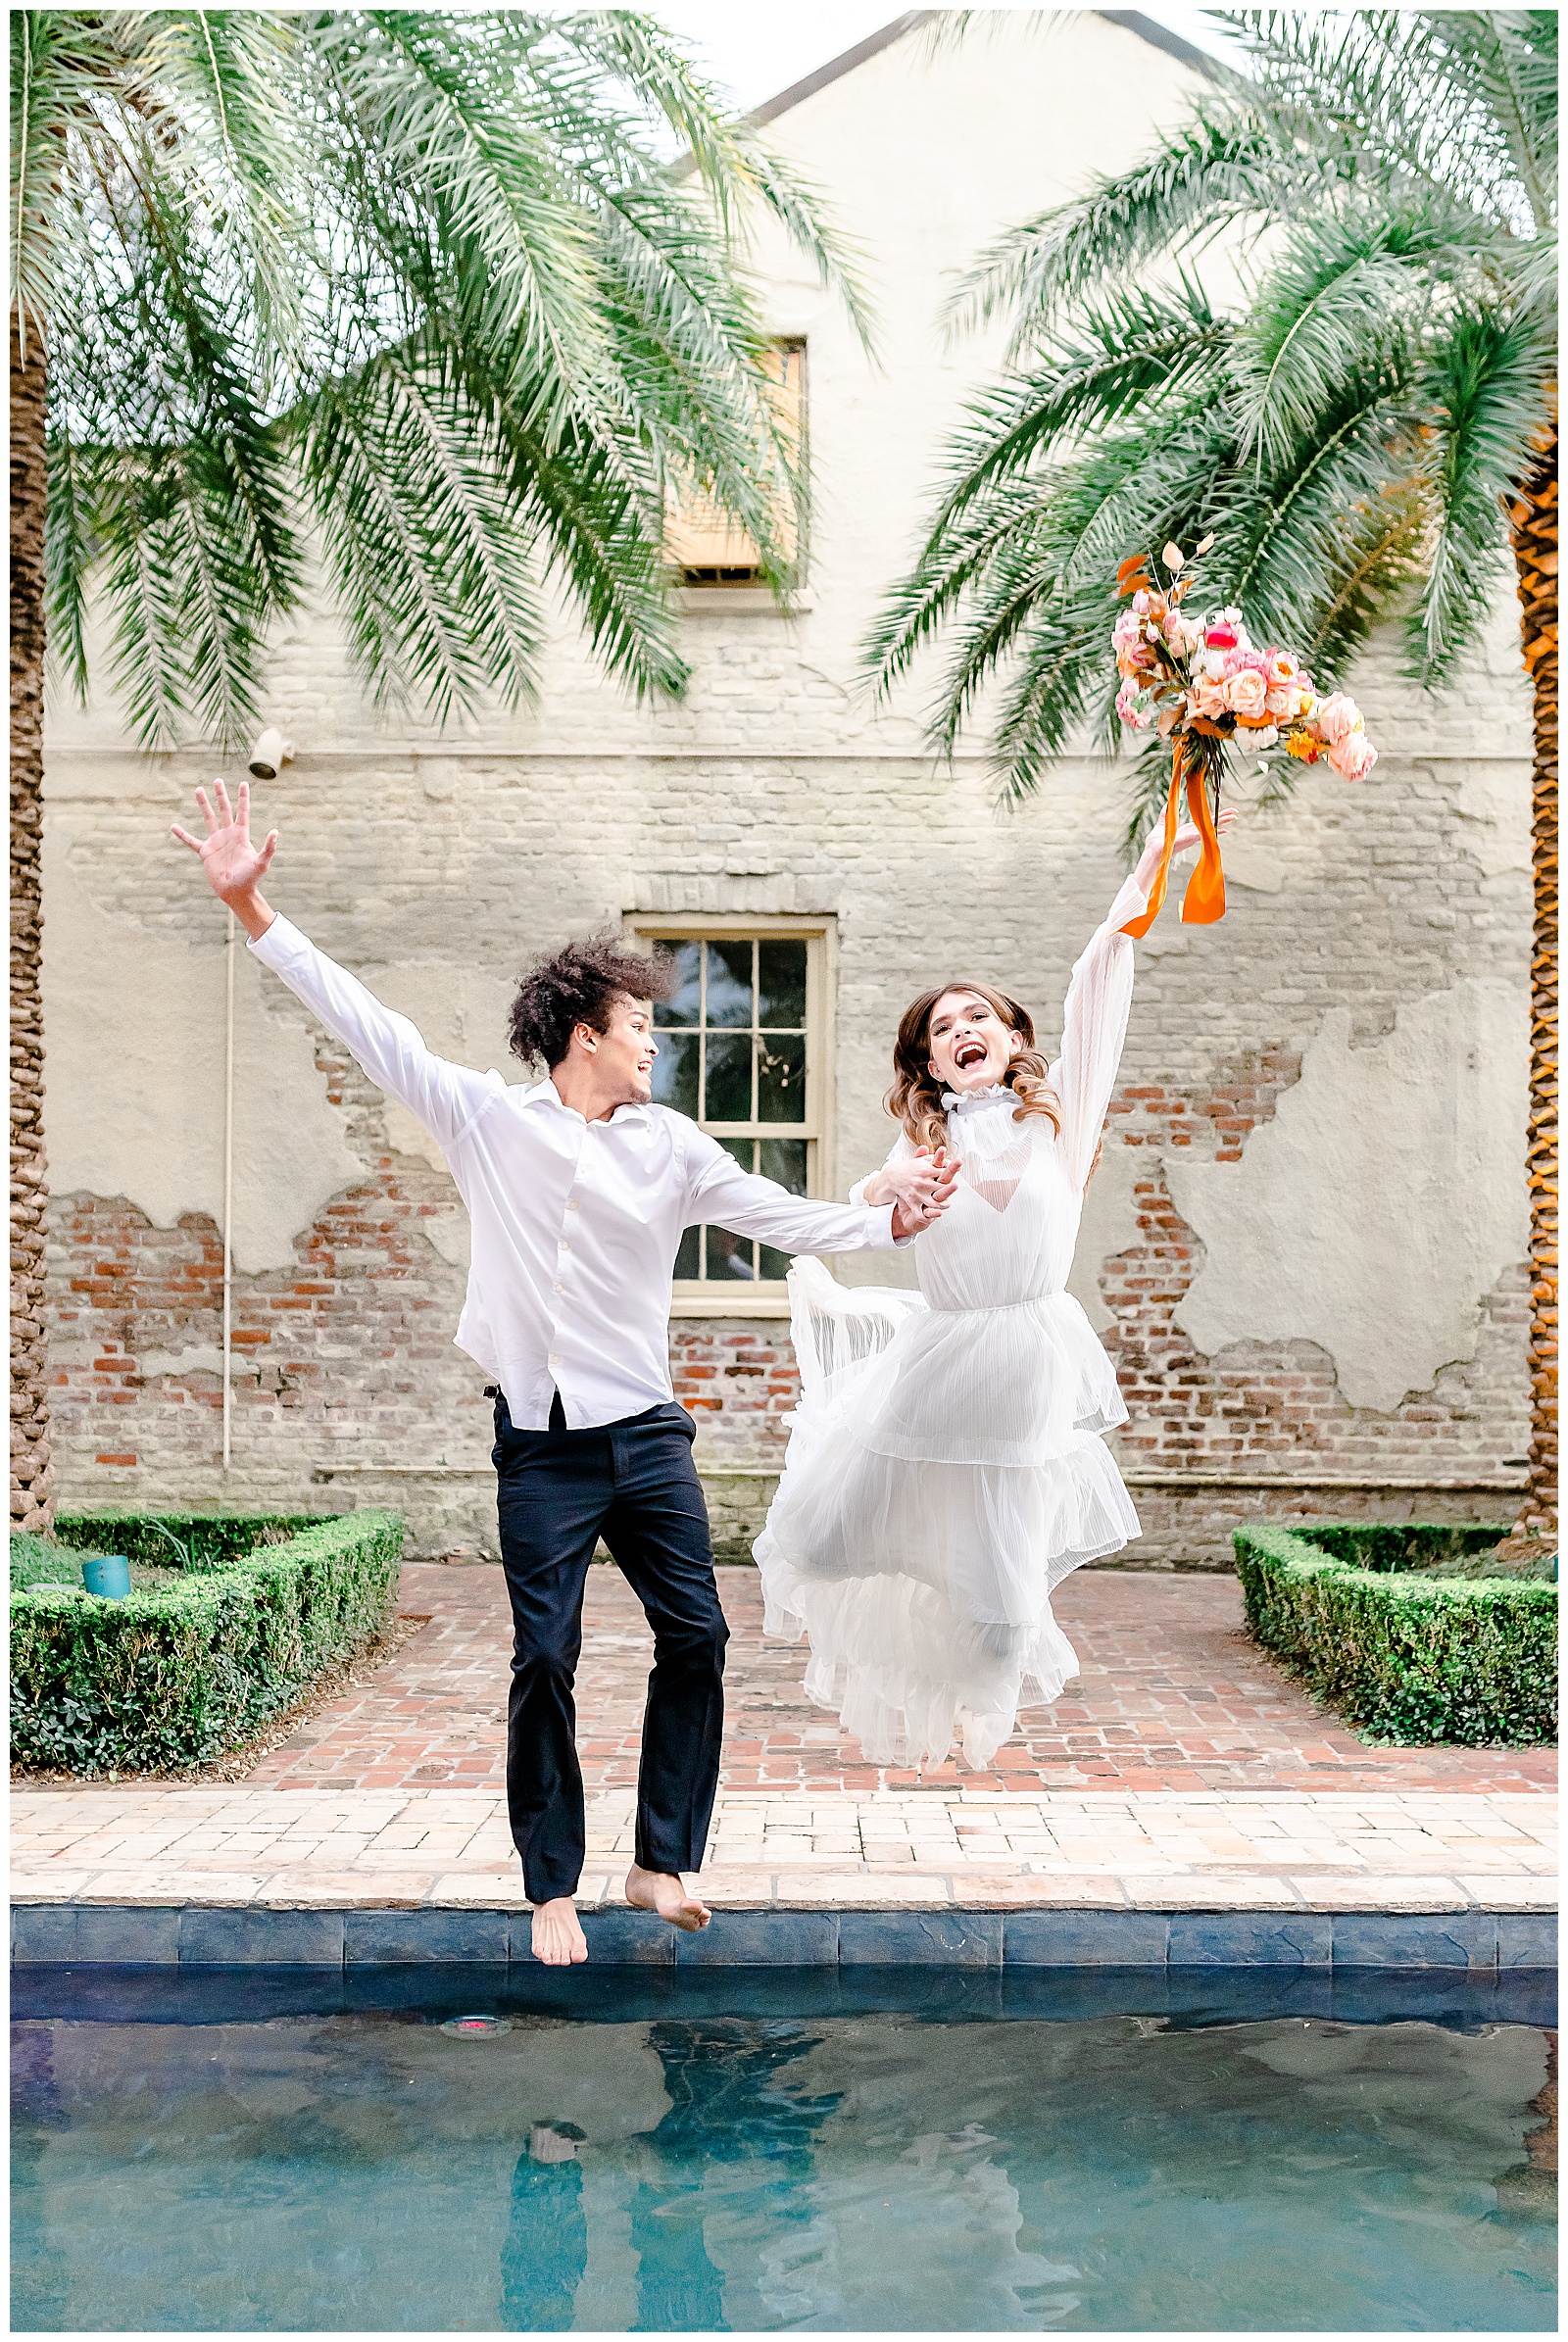 New Orleans Wedding Race + Religous Wedding Couple bride jumping in pool in wedding dress